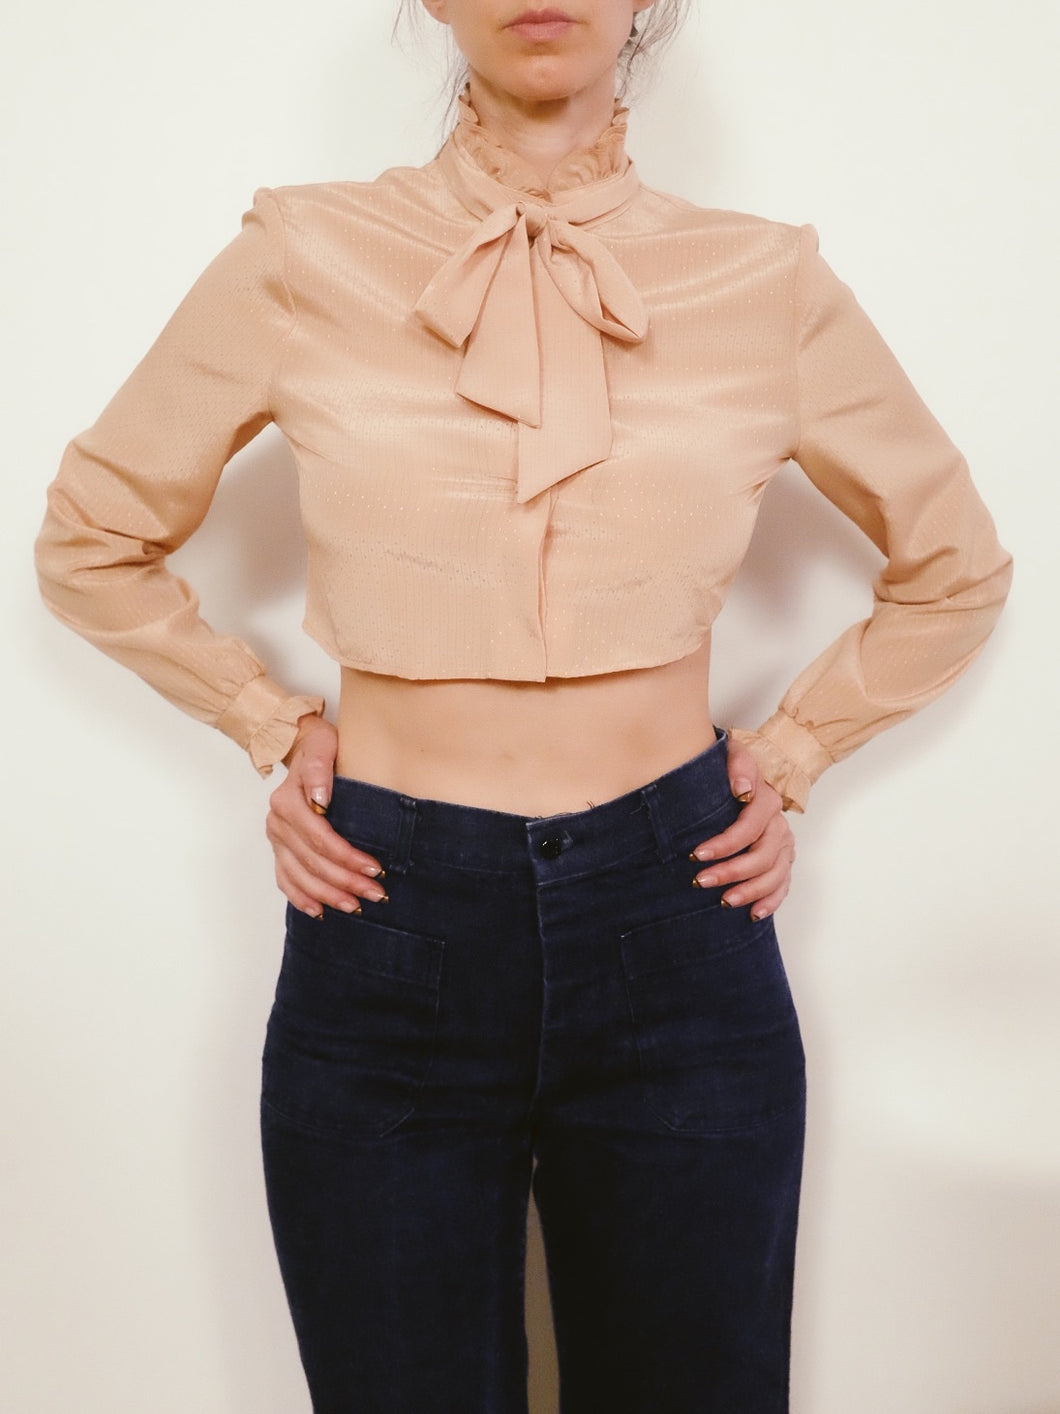 Transformed Vintage Top - Cropped and Opened Back - Size Medium